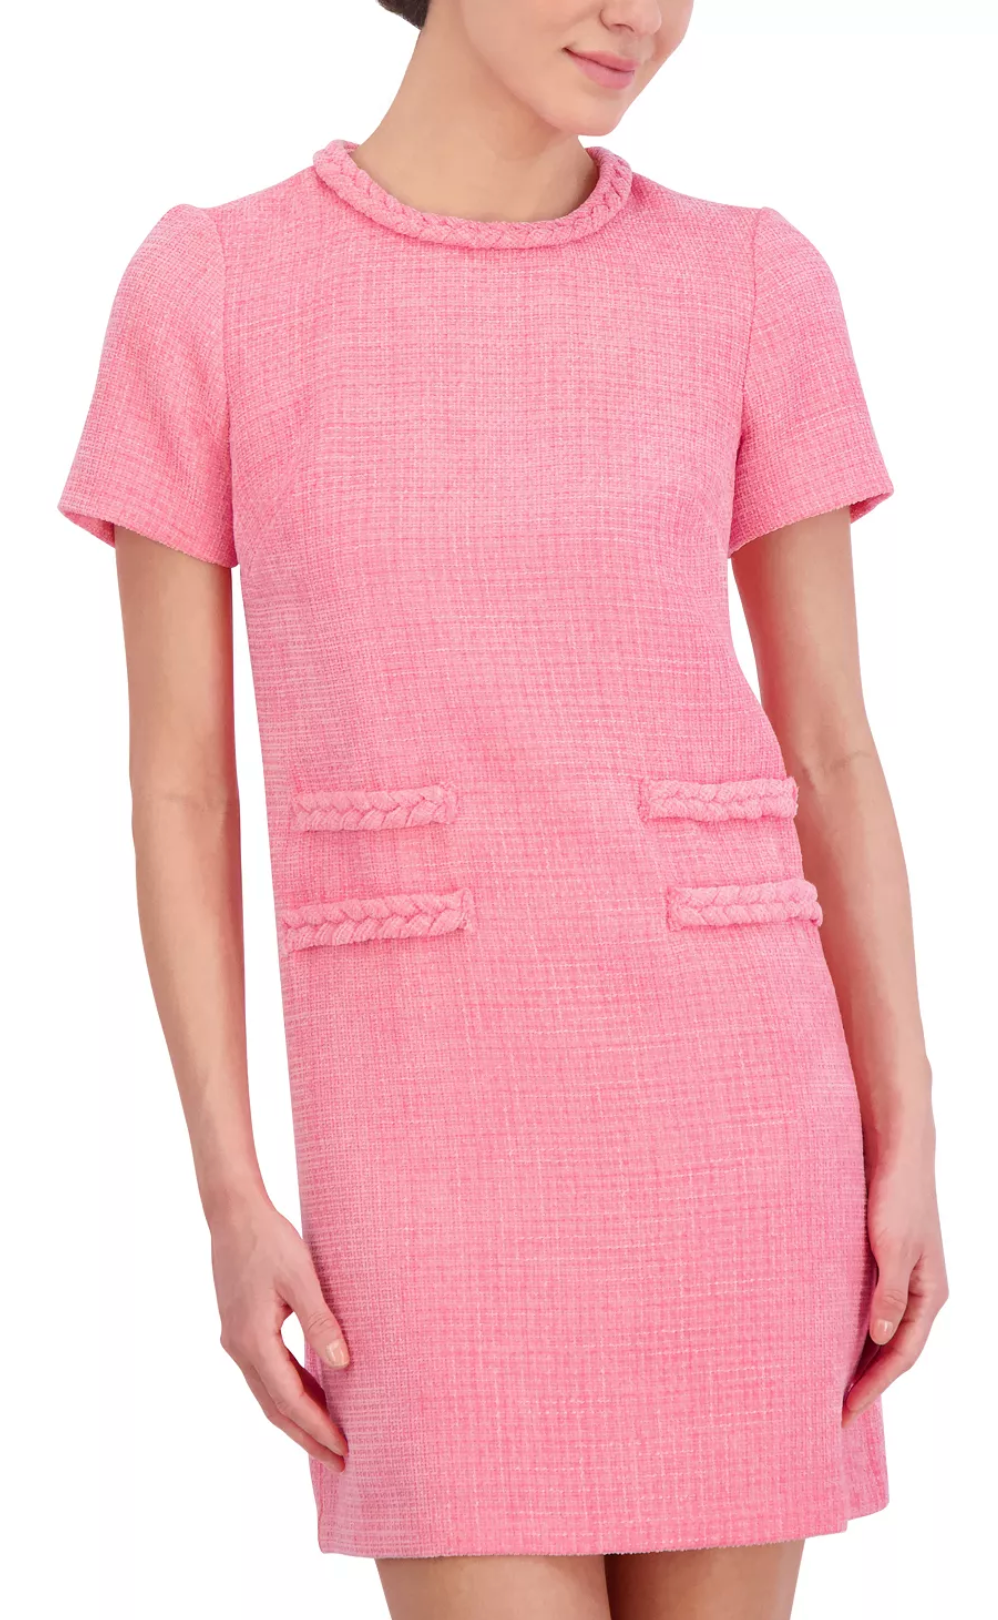 Braided Trim Boucle Shift Dress in Pink - The French Shoppe